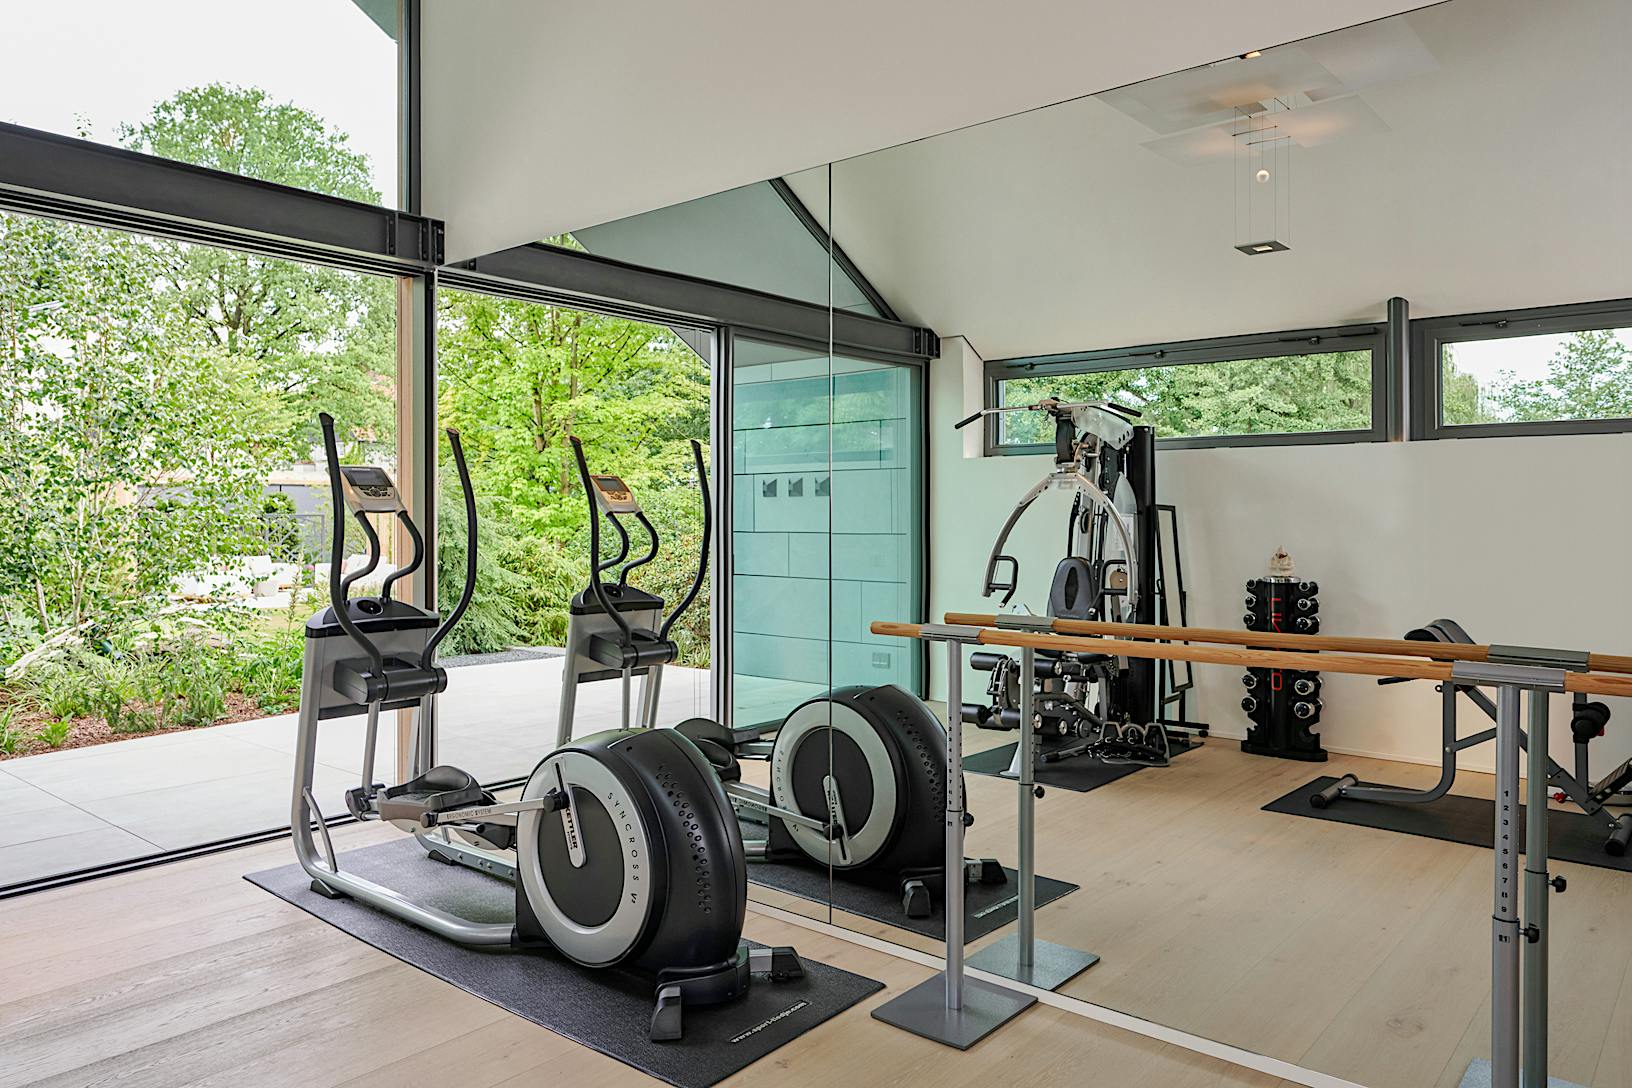 A gym room with exercise equipment and a large glass wall